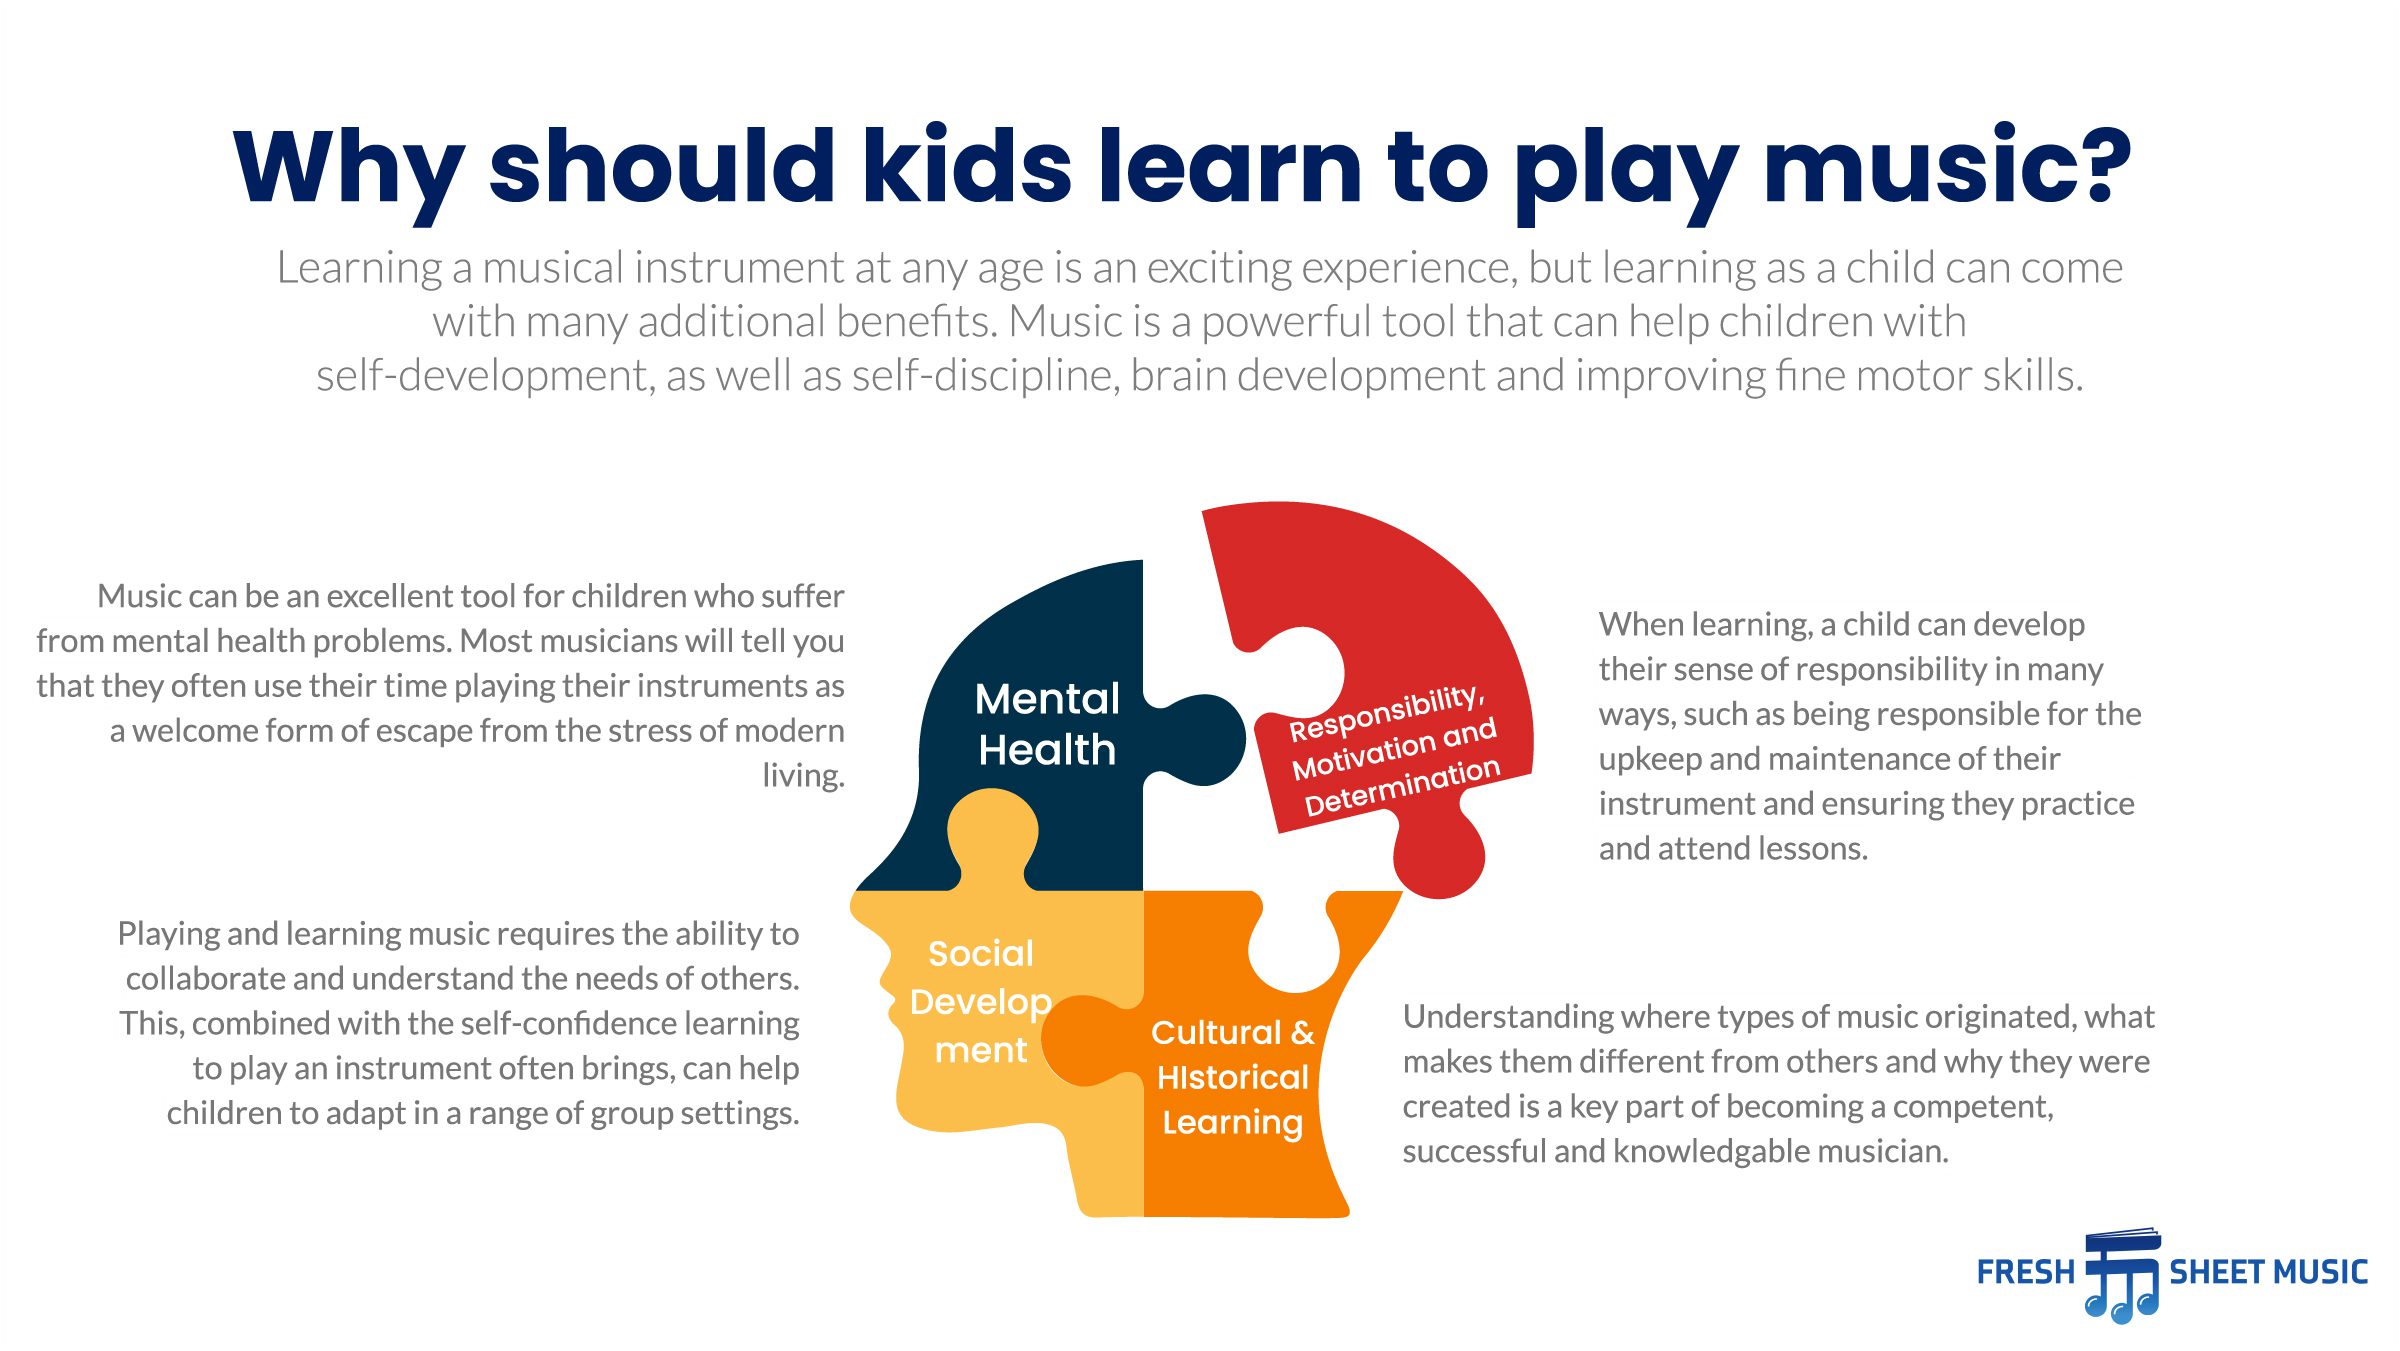 Why should kids learn to play music